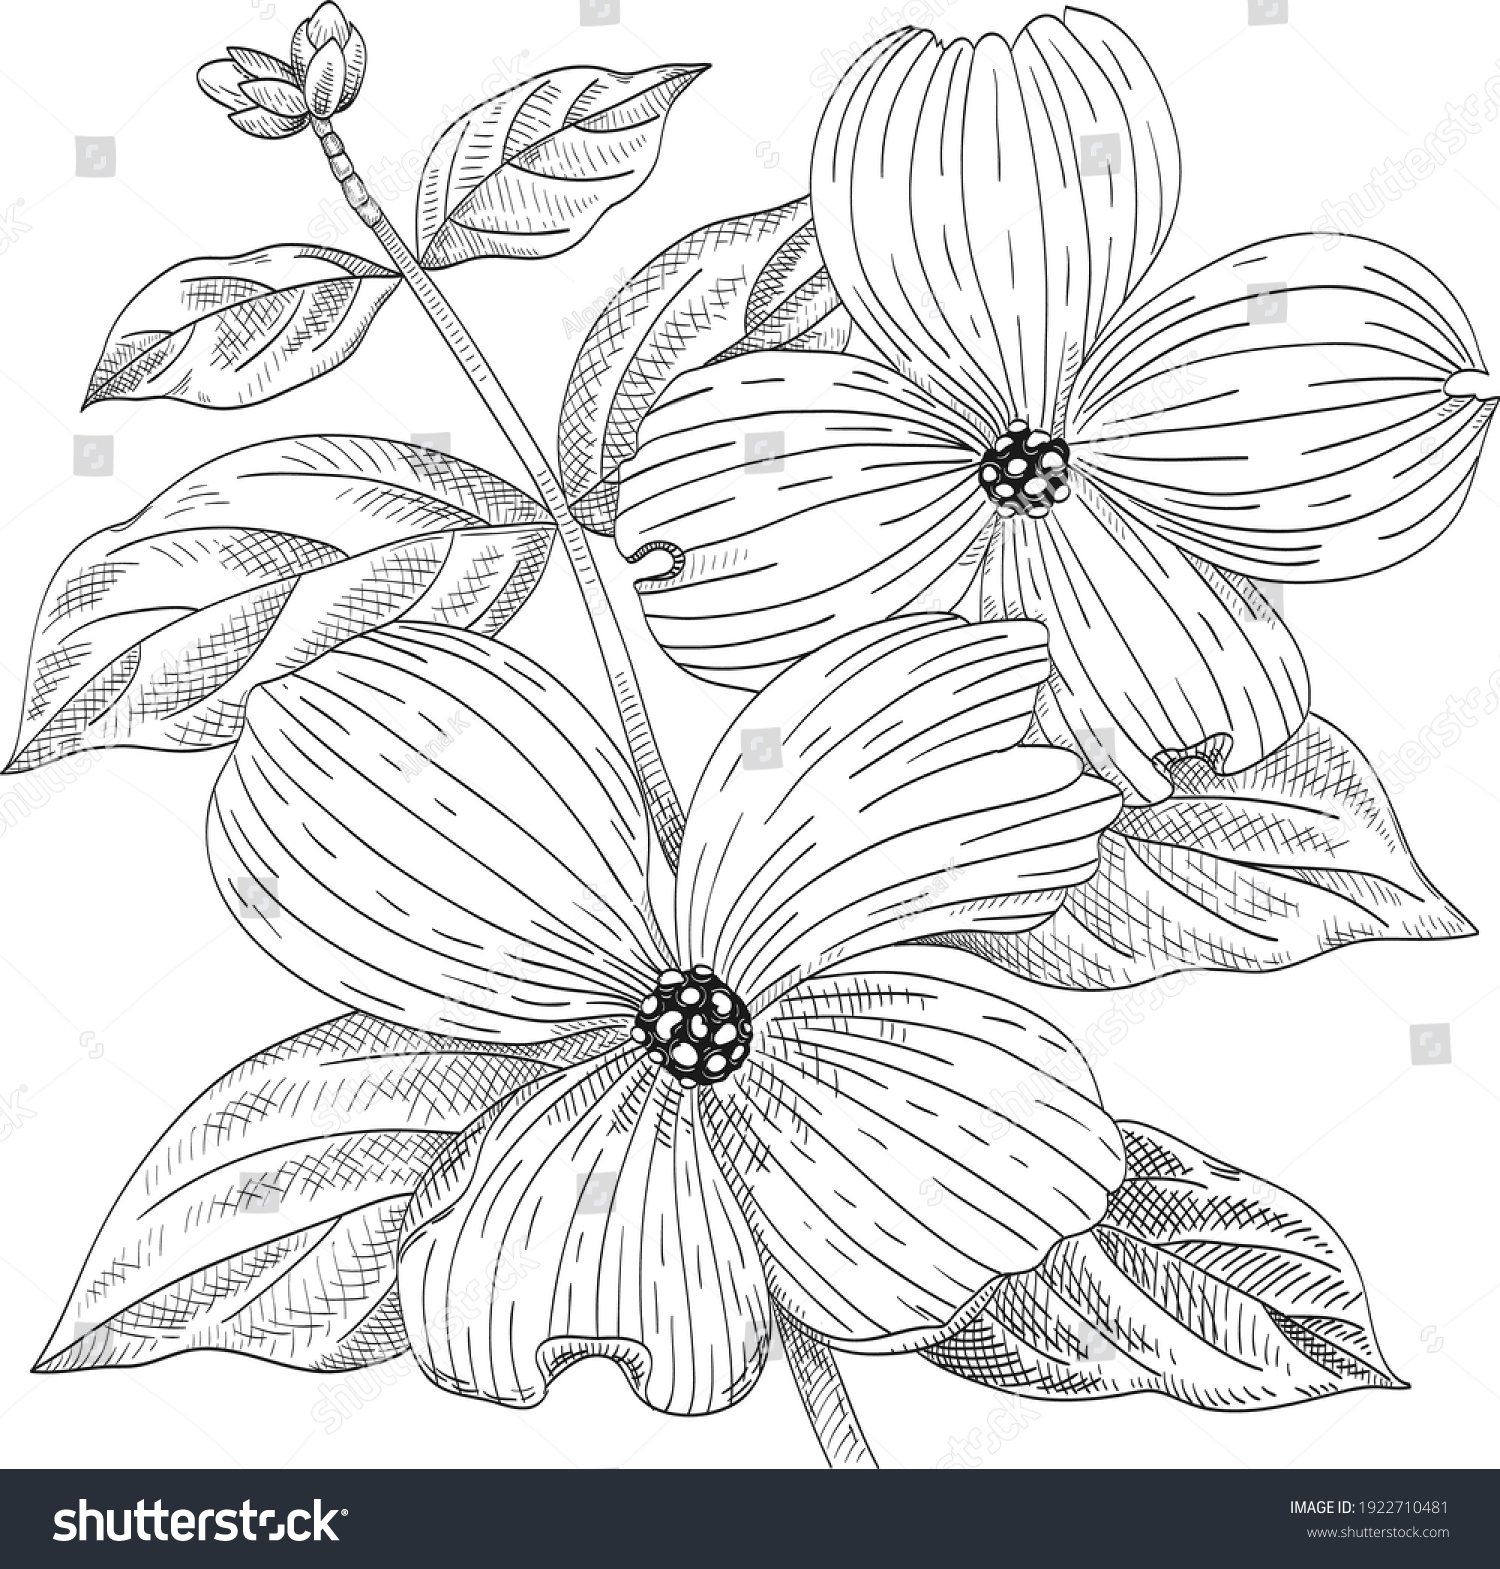 SVG of Dogwood branch with flowers. Line drawing. Black and white hand drawn vector illustration svg